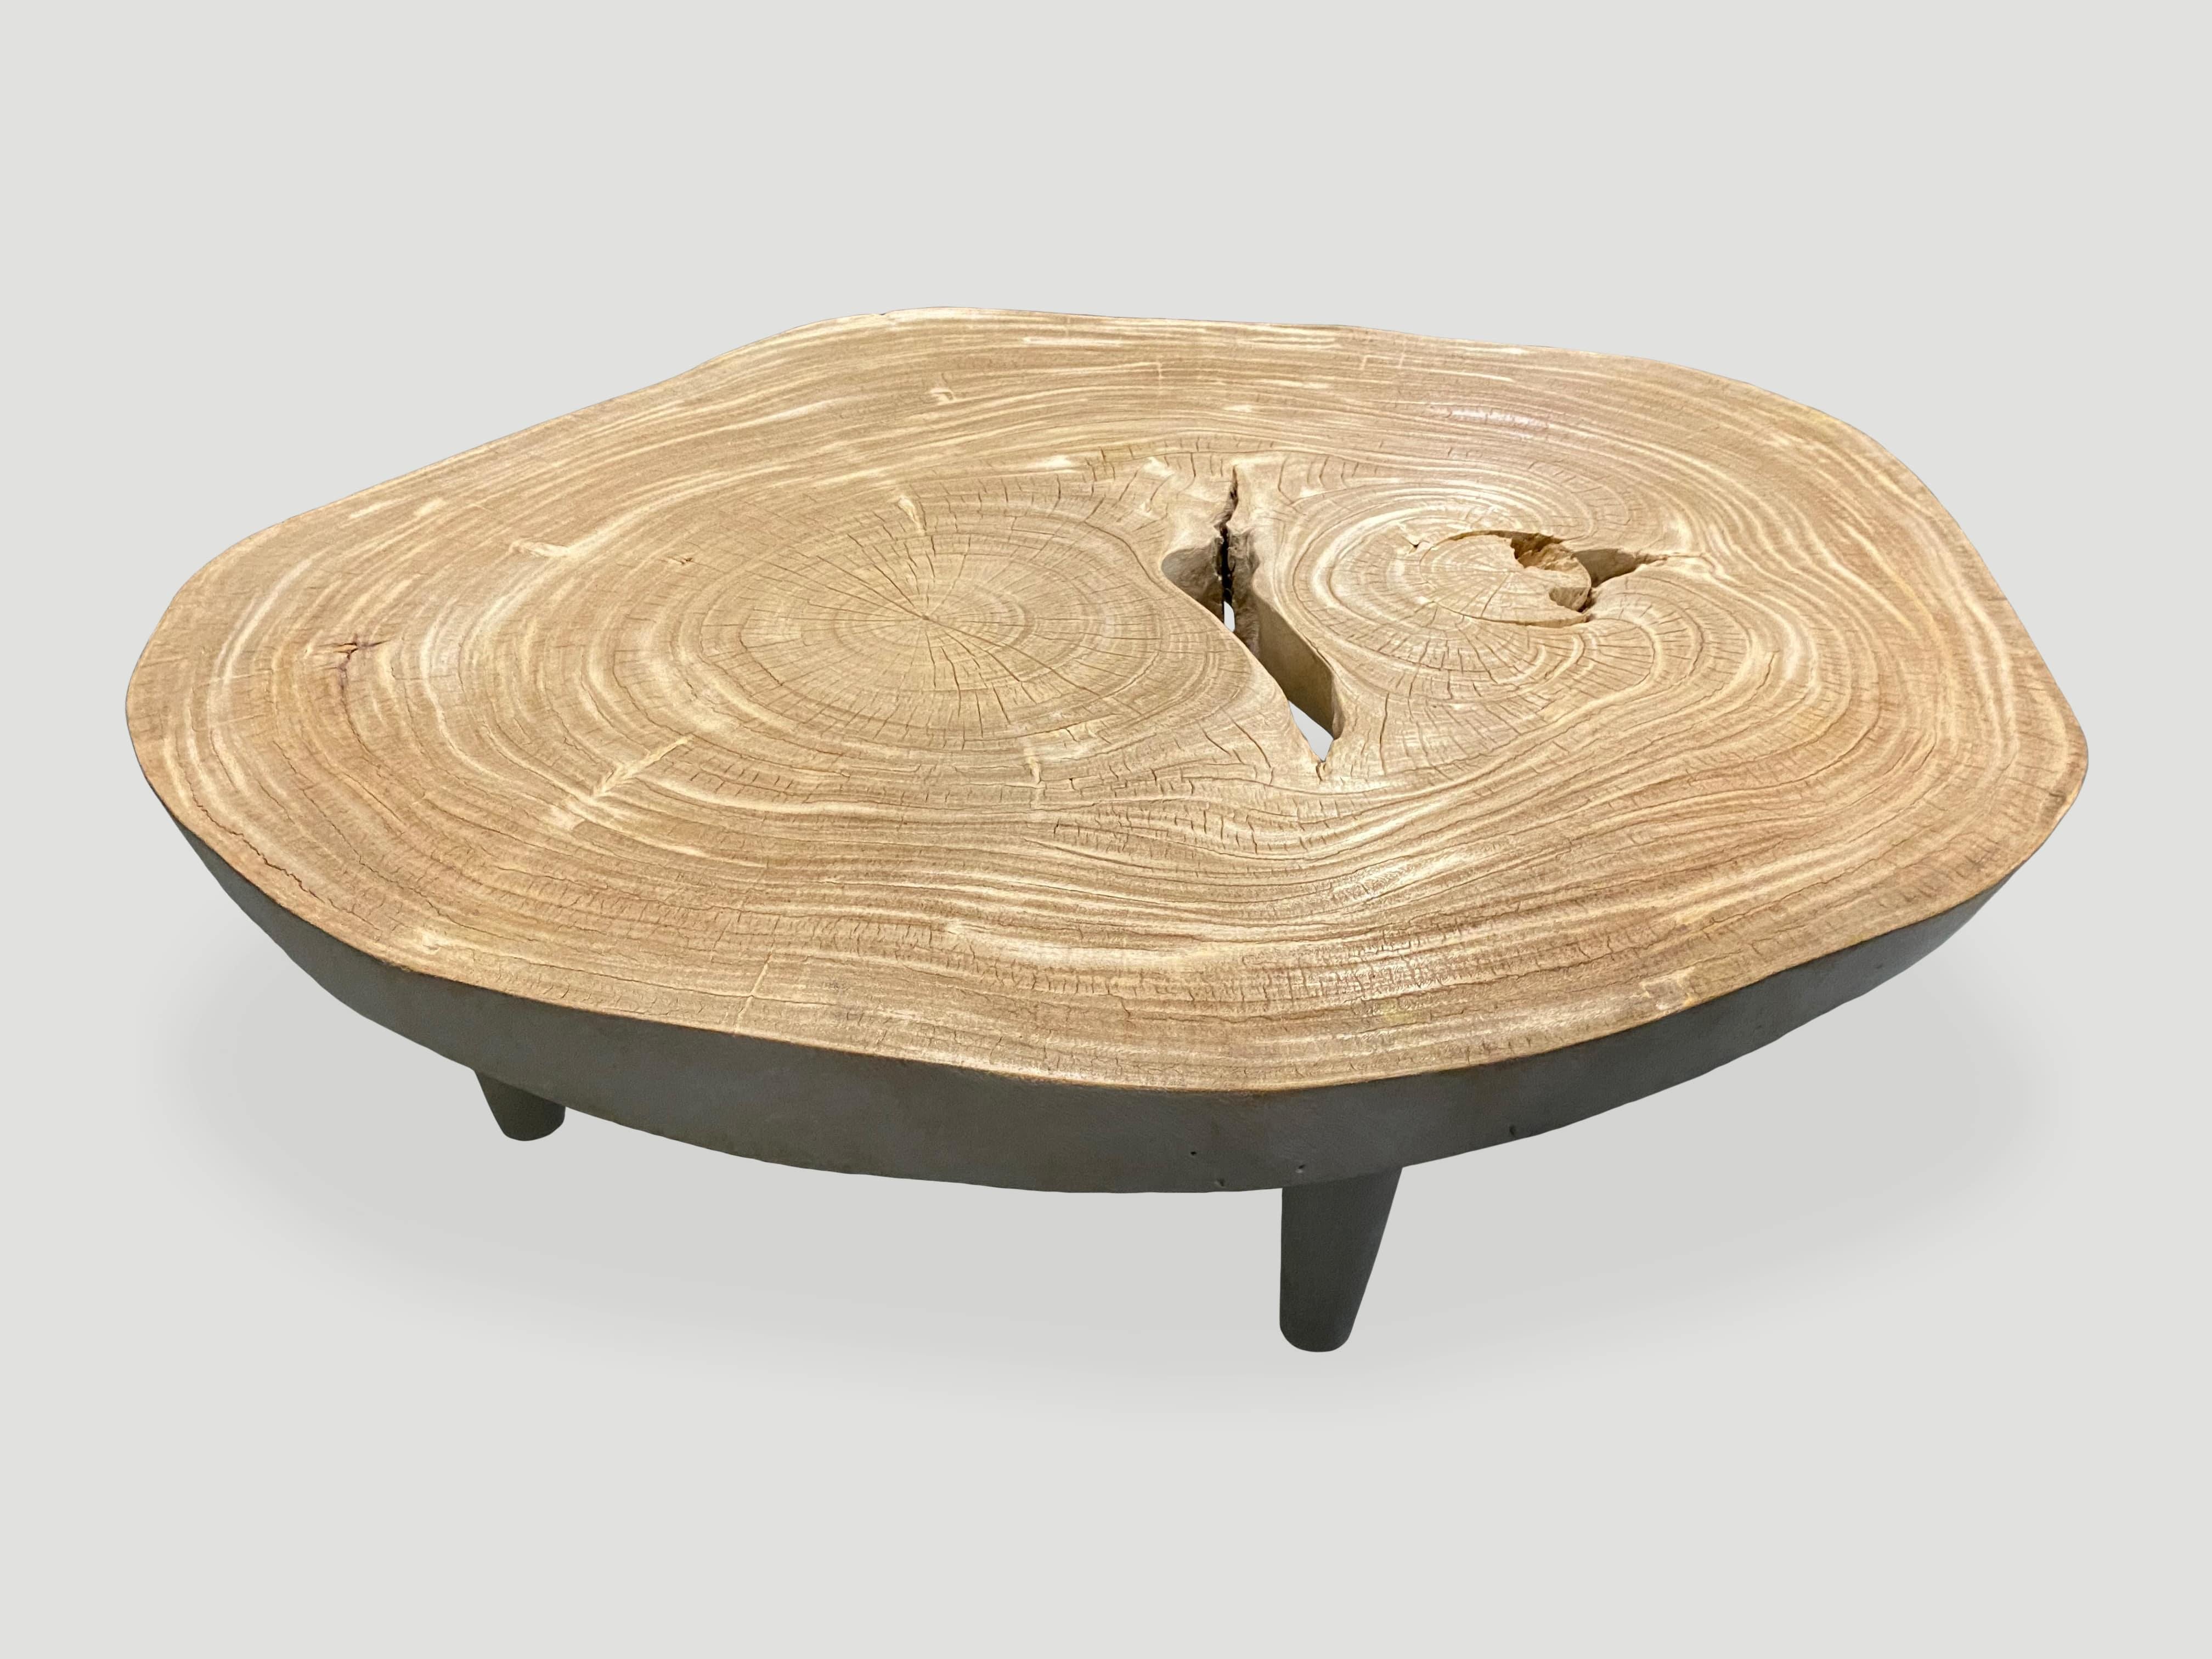 Impressive single slab coffee table, set on cone shaped mid century style legs. The wood is unknown though indigenous to Indonesia. We love the natural way it ‘crackles’ after we applied the bleach to the wood and left in the sun to turn this